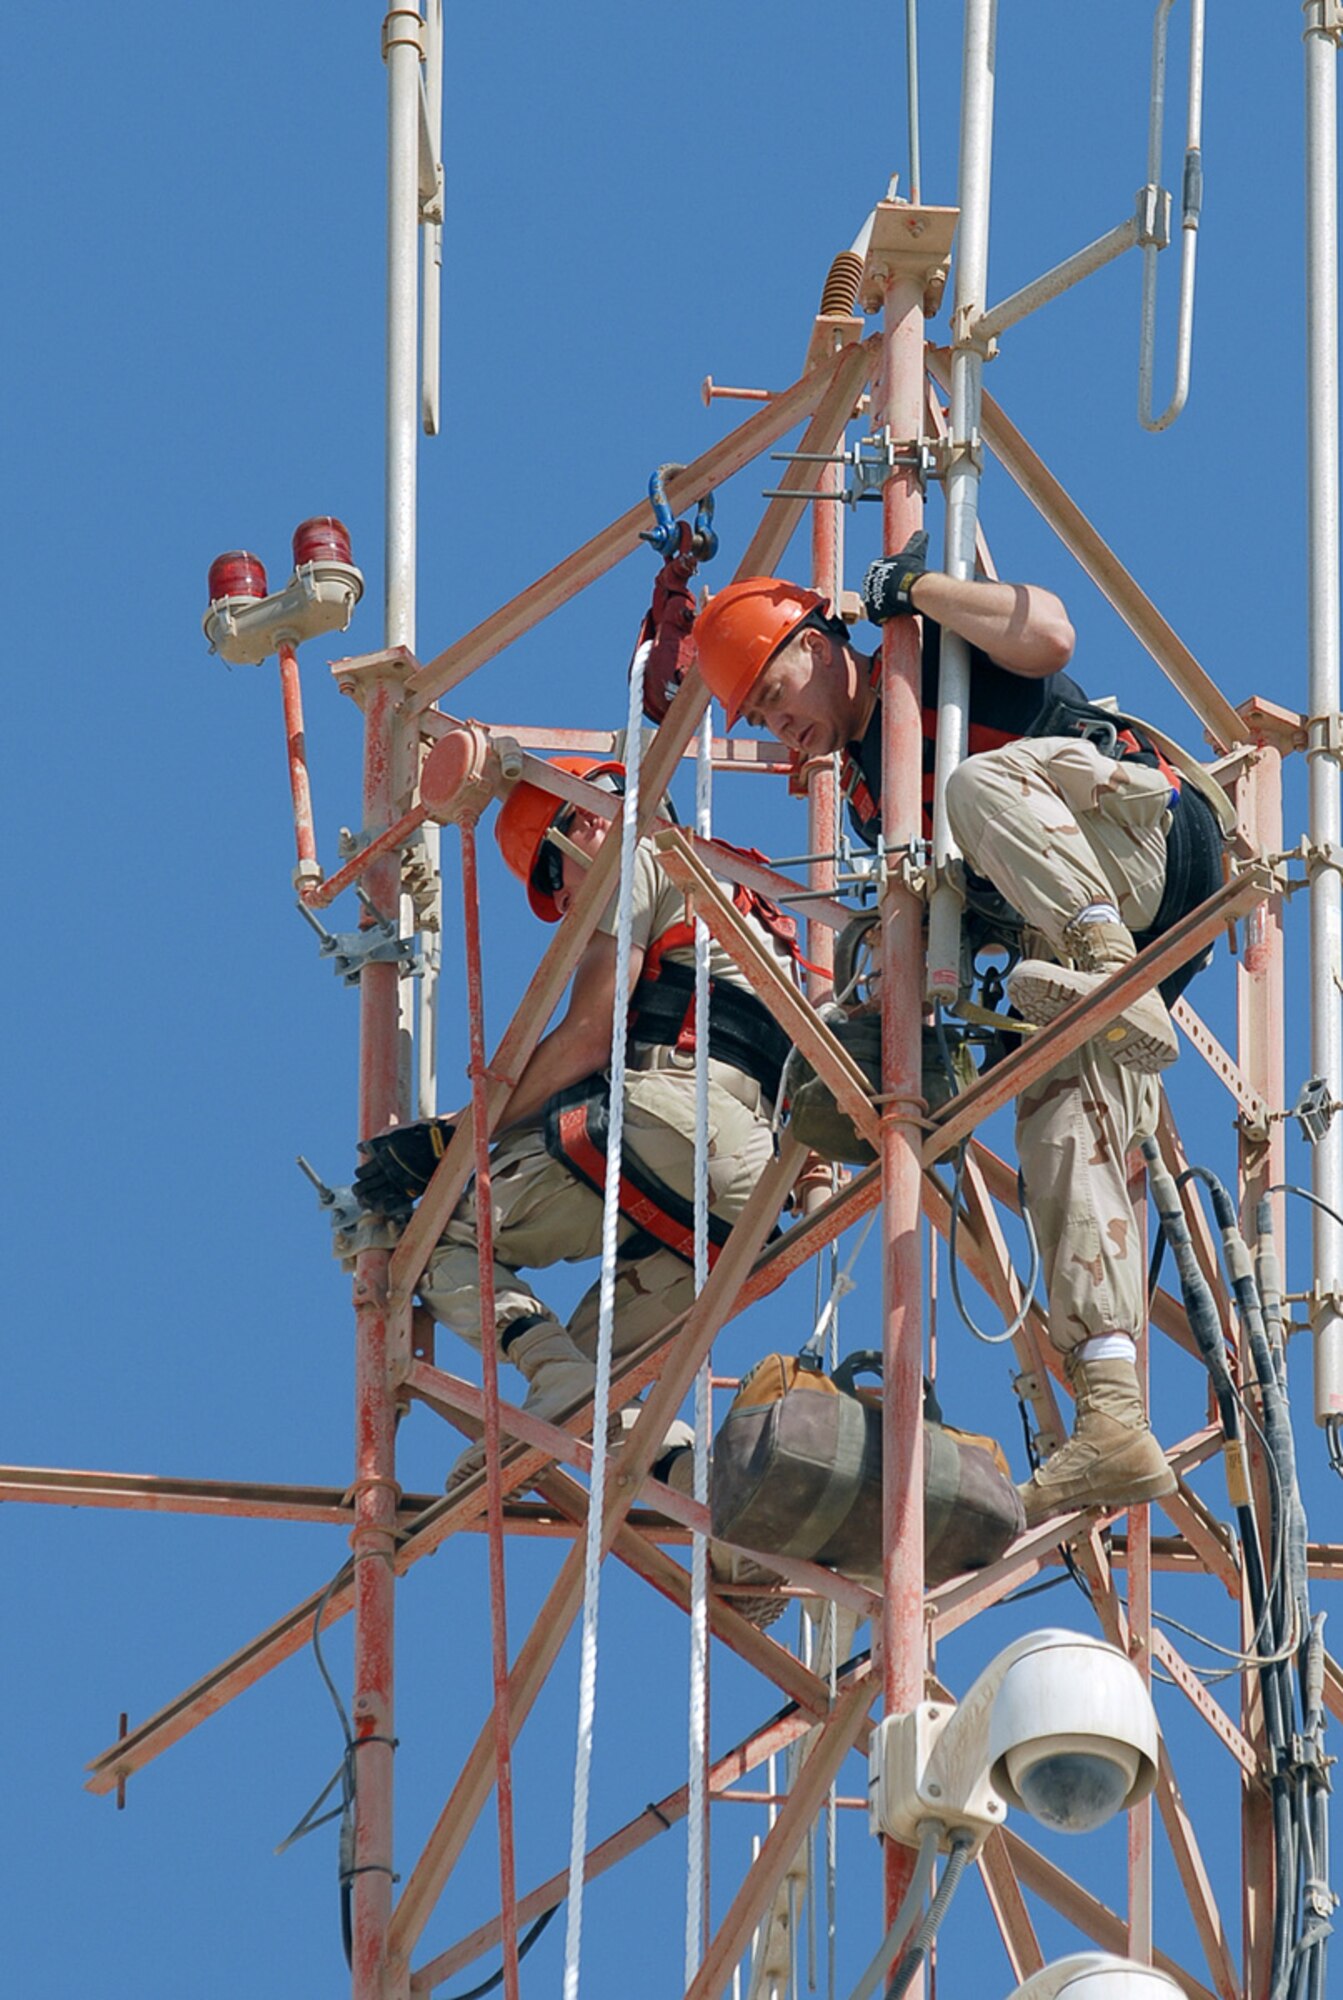 SOUTHWEST ASIA - Airman First Class  Robert Bowley and Staff Sgt. Charles Austin, 379th Expeditionary Communications Squadron, install a new antenna atop a one-hundred-fifty foot tower at a Southwest Asia air base Dec. 8. Airman Bowley is deployed from Andrews Air Force Base AFB, Md. Sergeant Austin is deployed from Lackland AFB, Texas. (U. S. Air Force photo by Staff Sgt. Douglas Olsen)